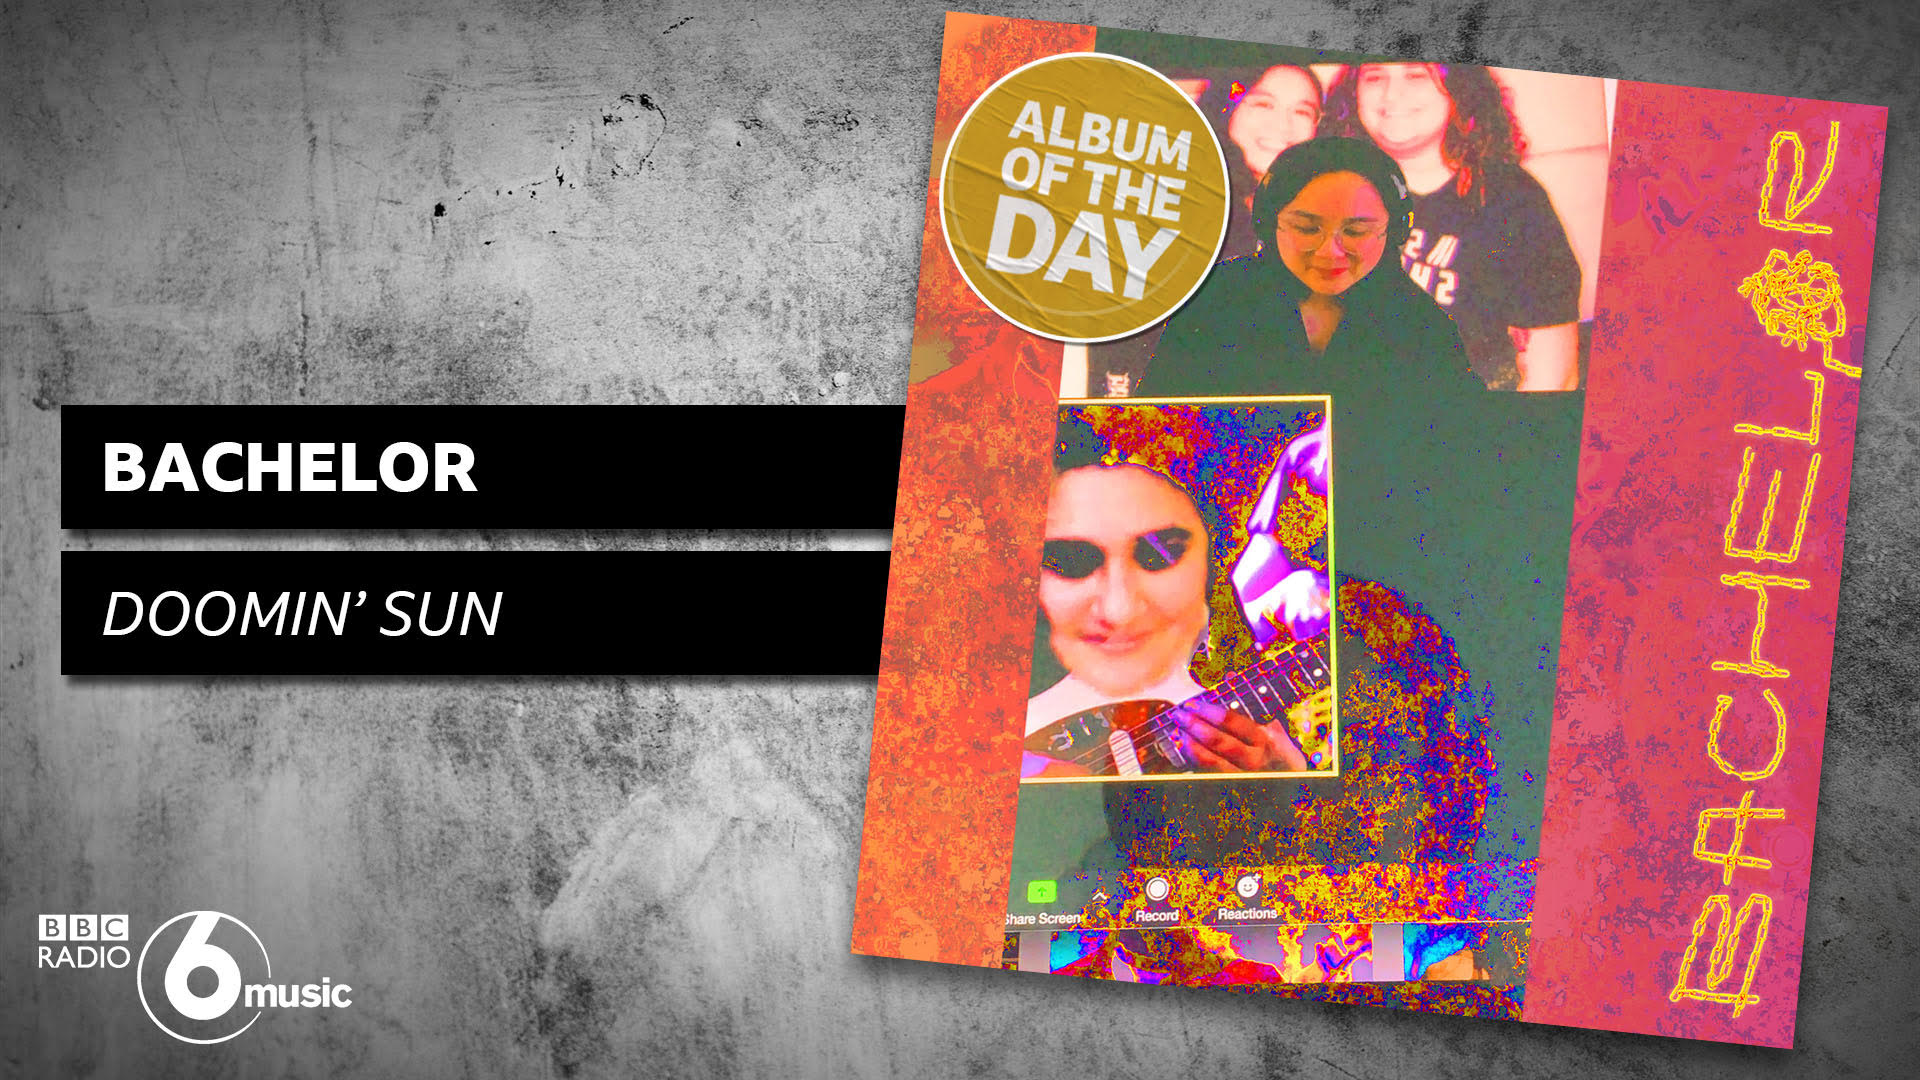 Bachelor – Doomin’ Sun is 6Music Album Of The Day!!